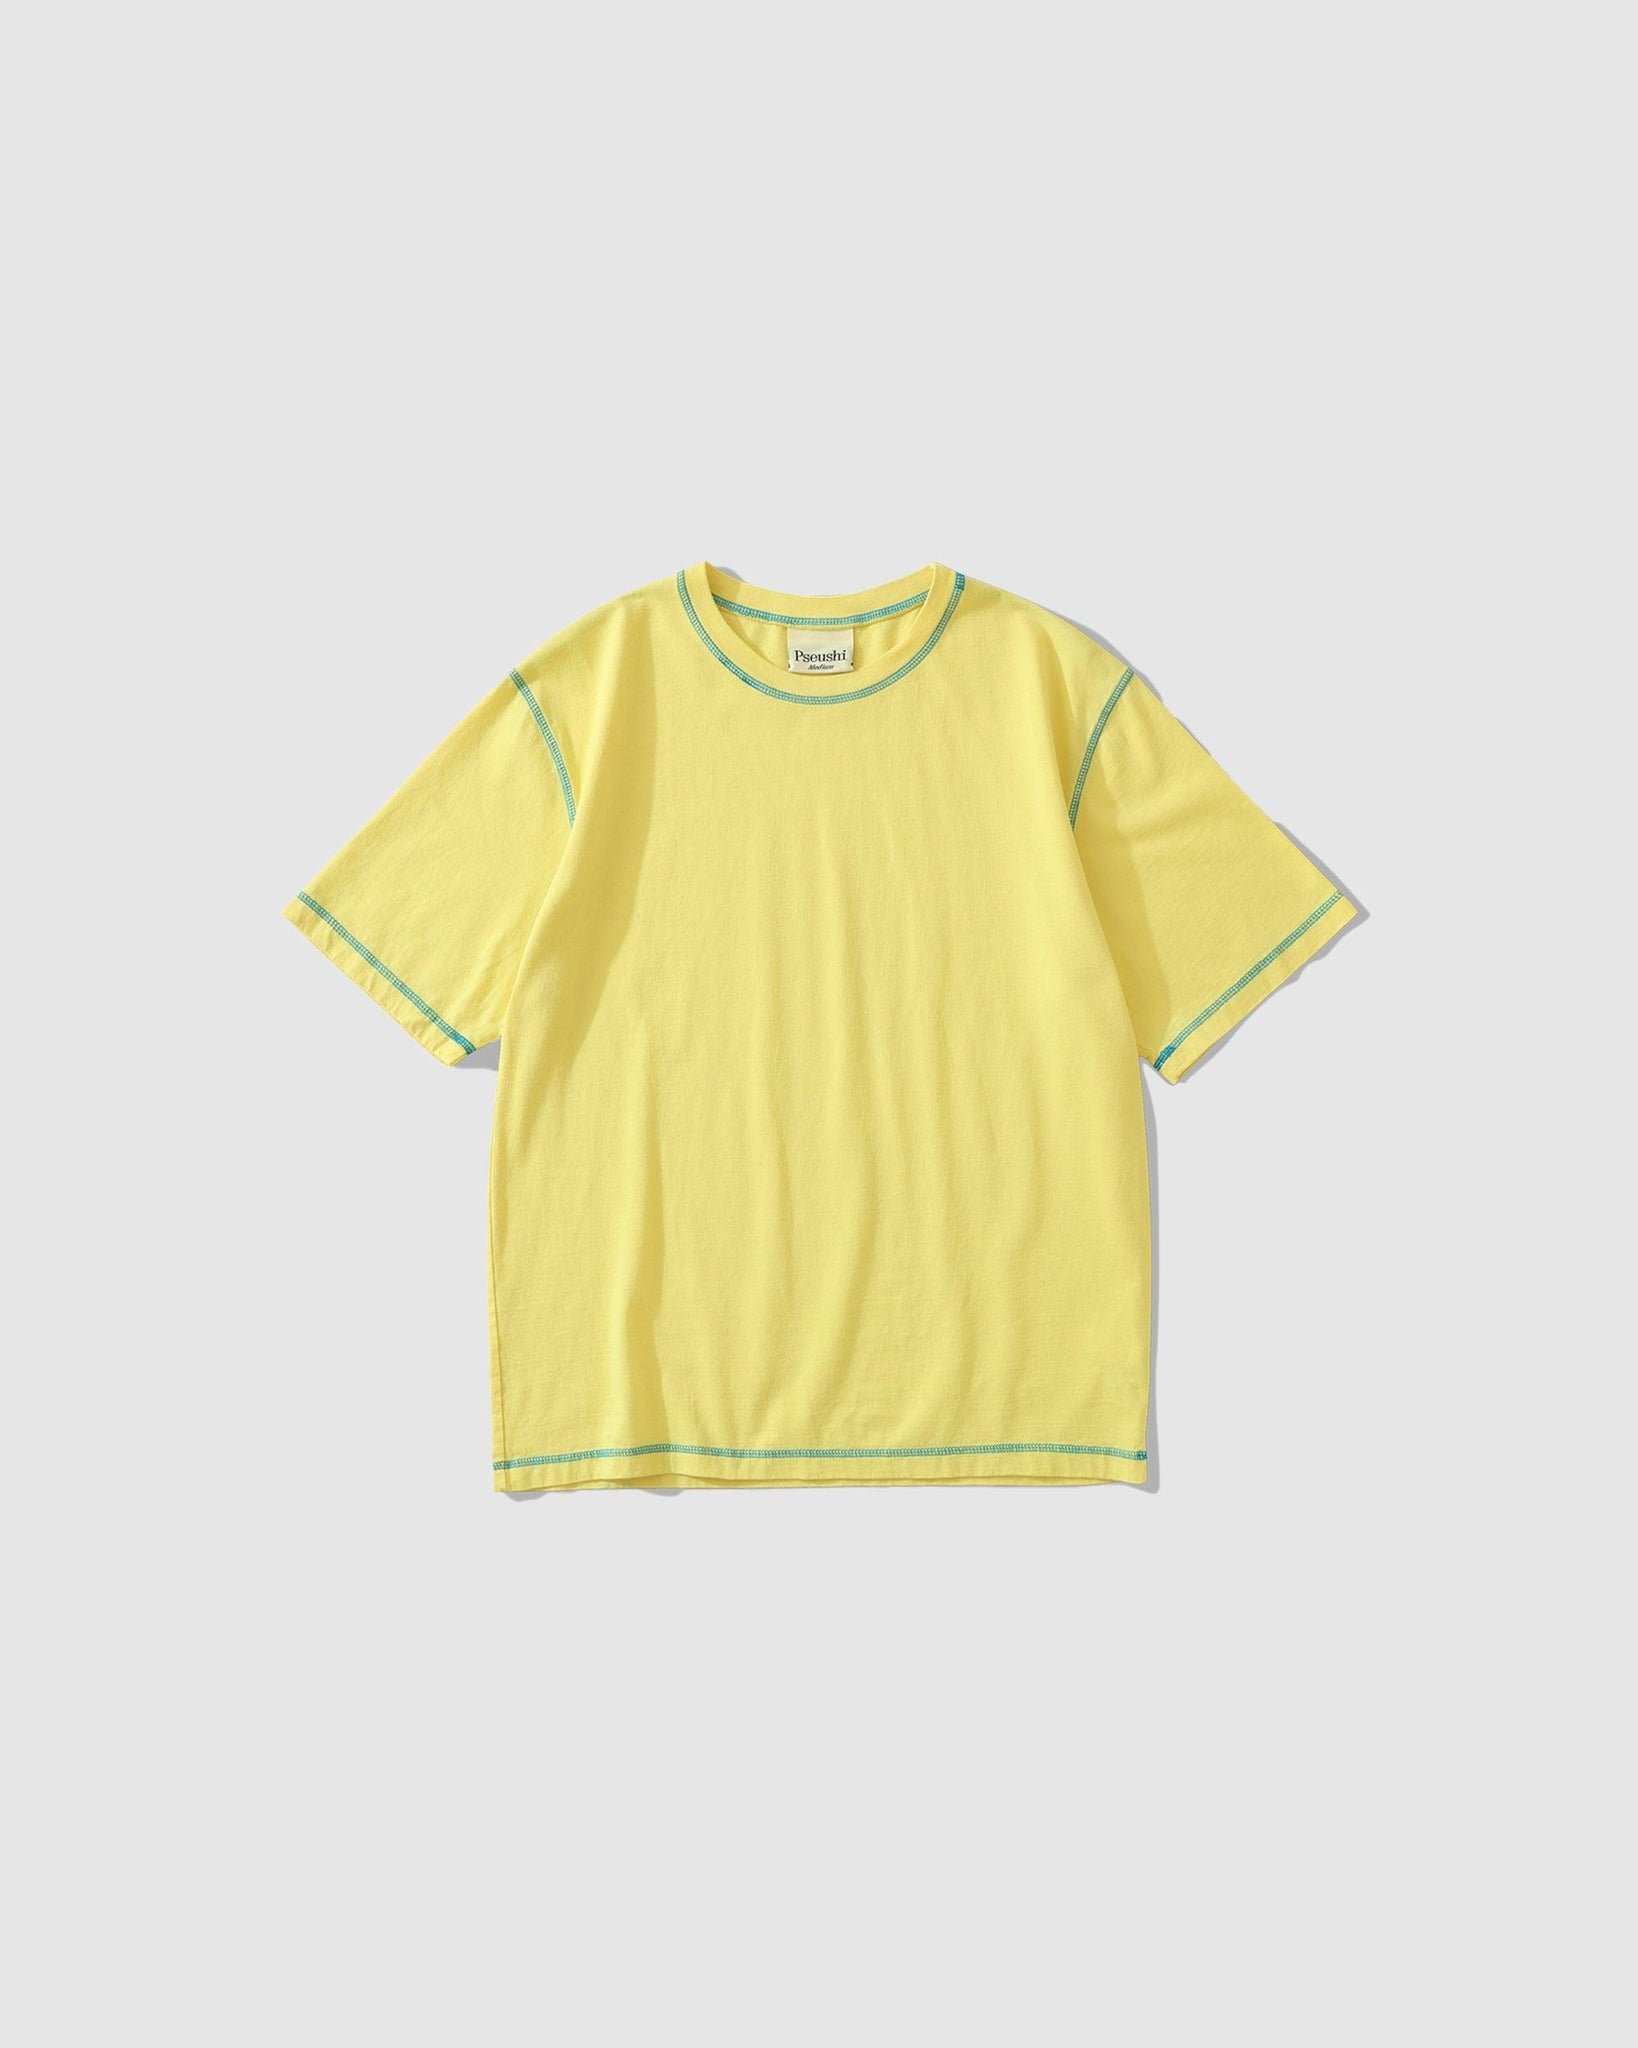 Contrast Stitch Tee LMN/AQU - {{ collection.title }} - Chinatown Country Club 